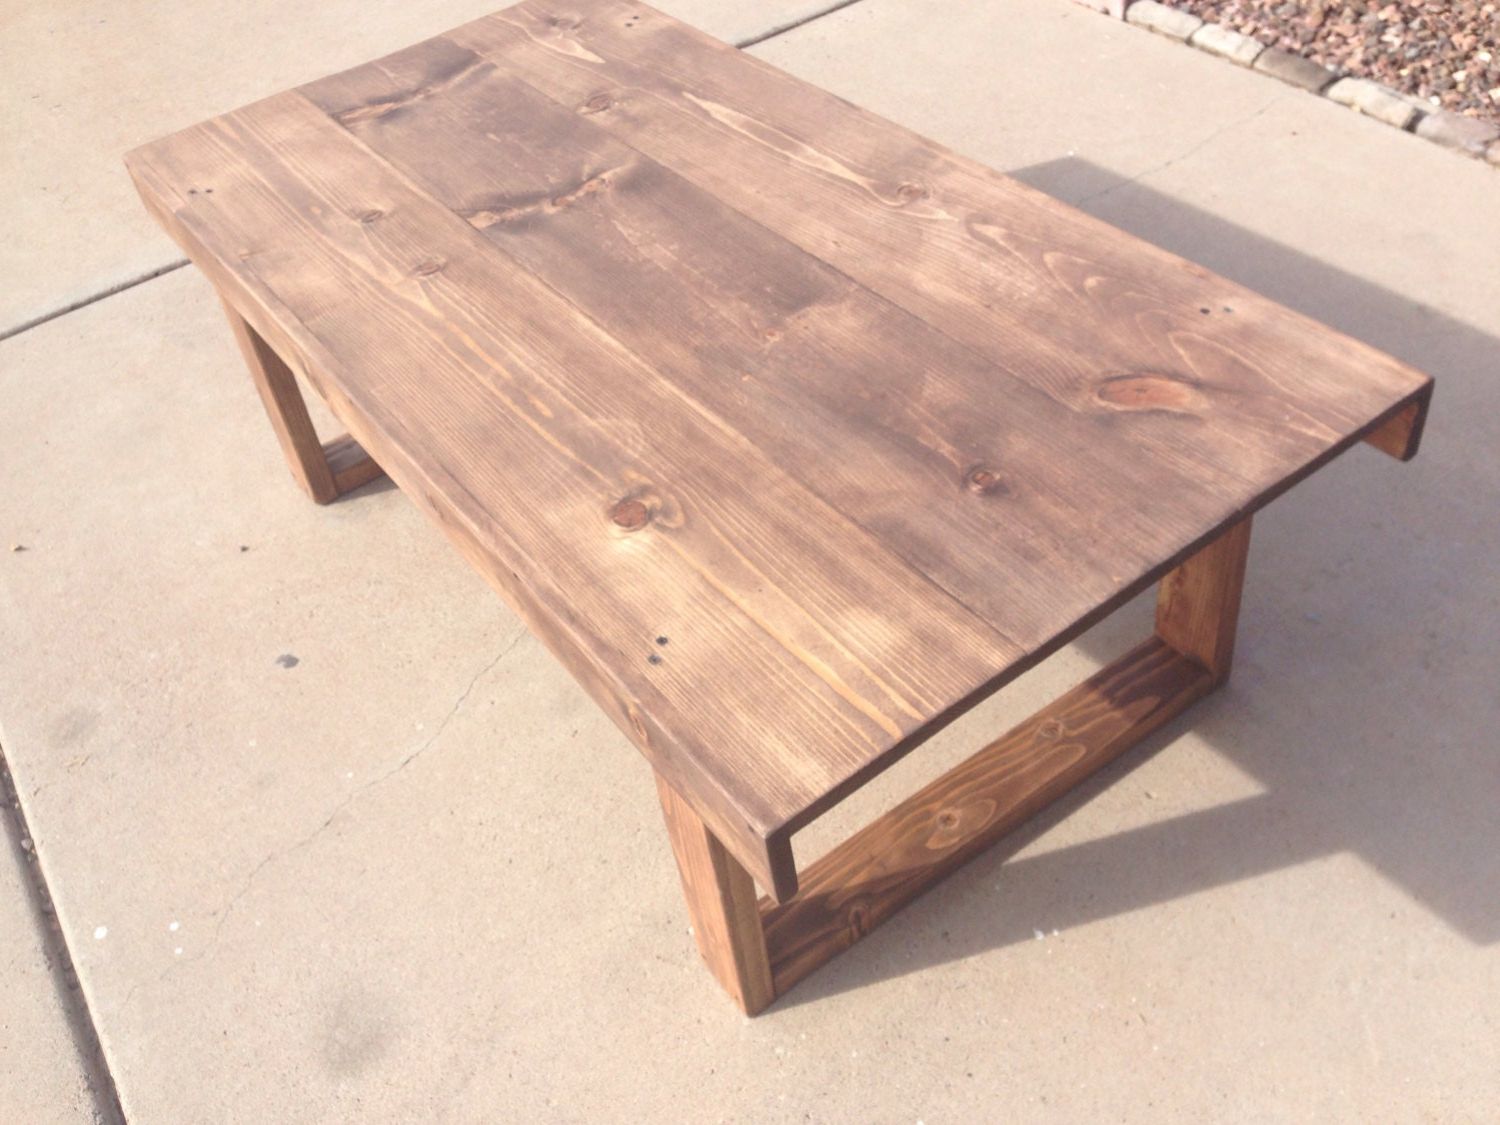 Handmade Larger Rustic Coffee Table In Walnut Throughout Well Known Rustic Walnut Wood Coffee Tables (Gallery 10 of 20)